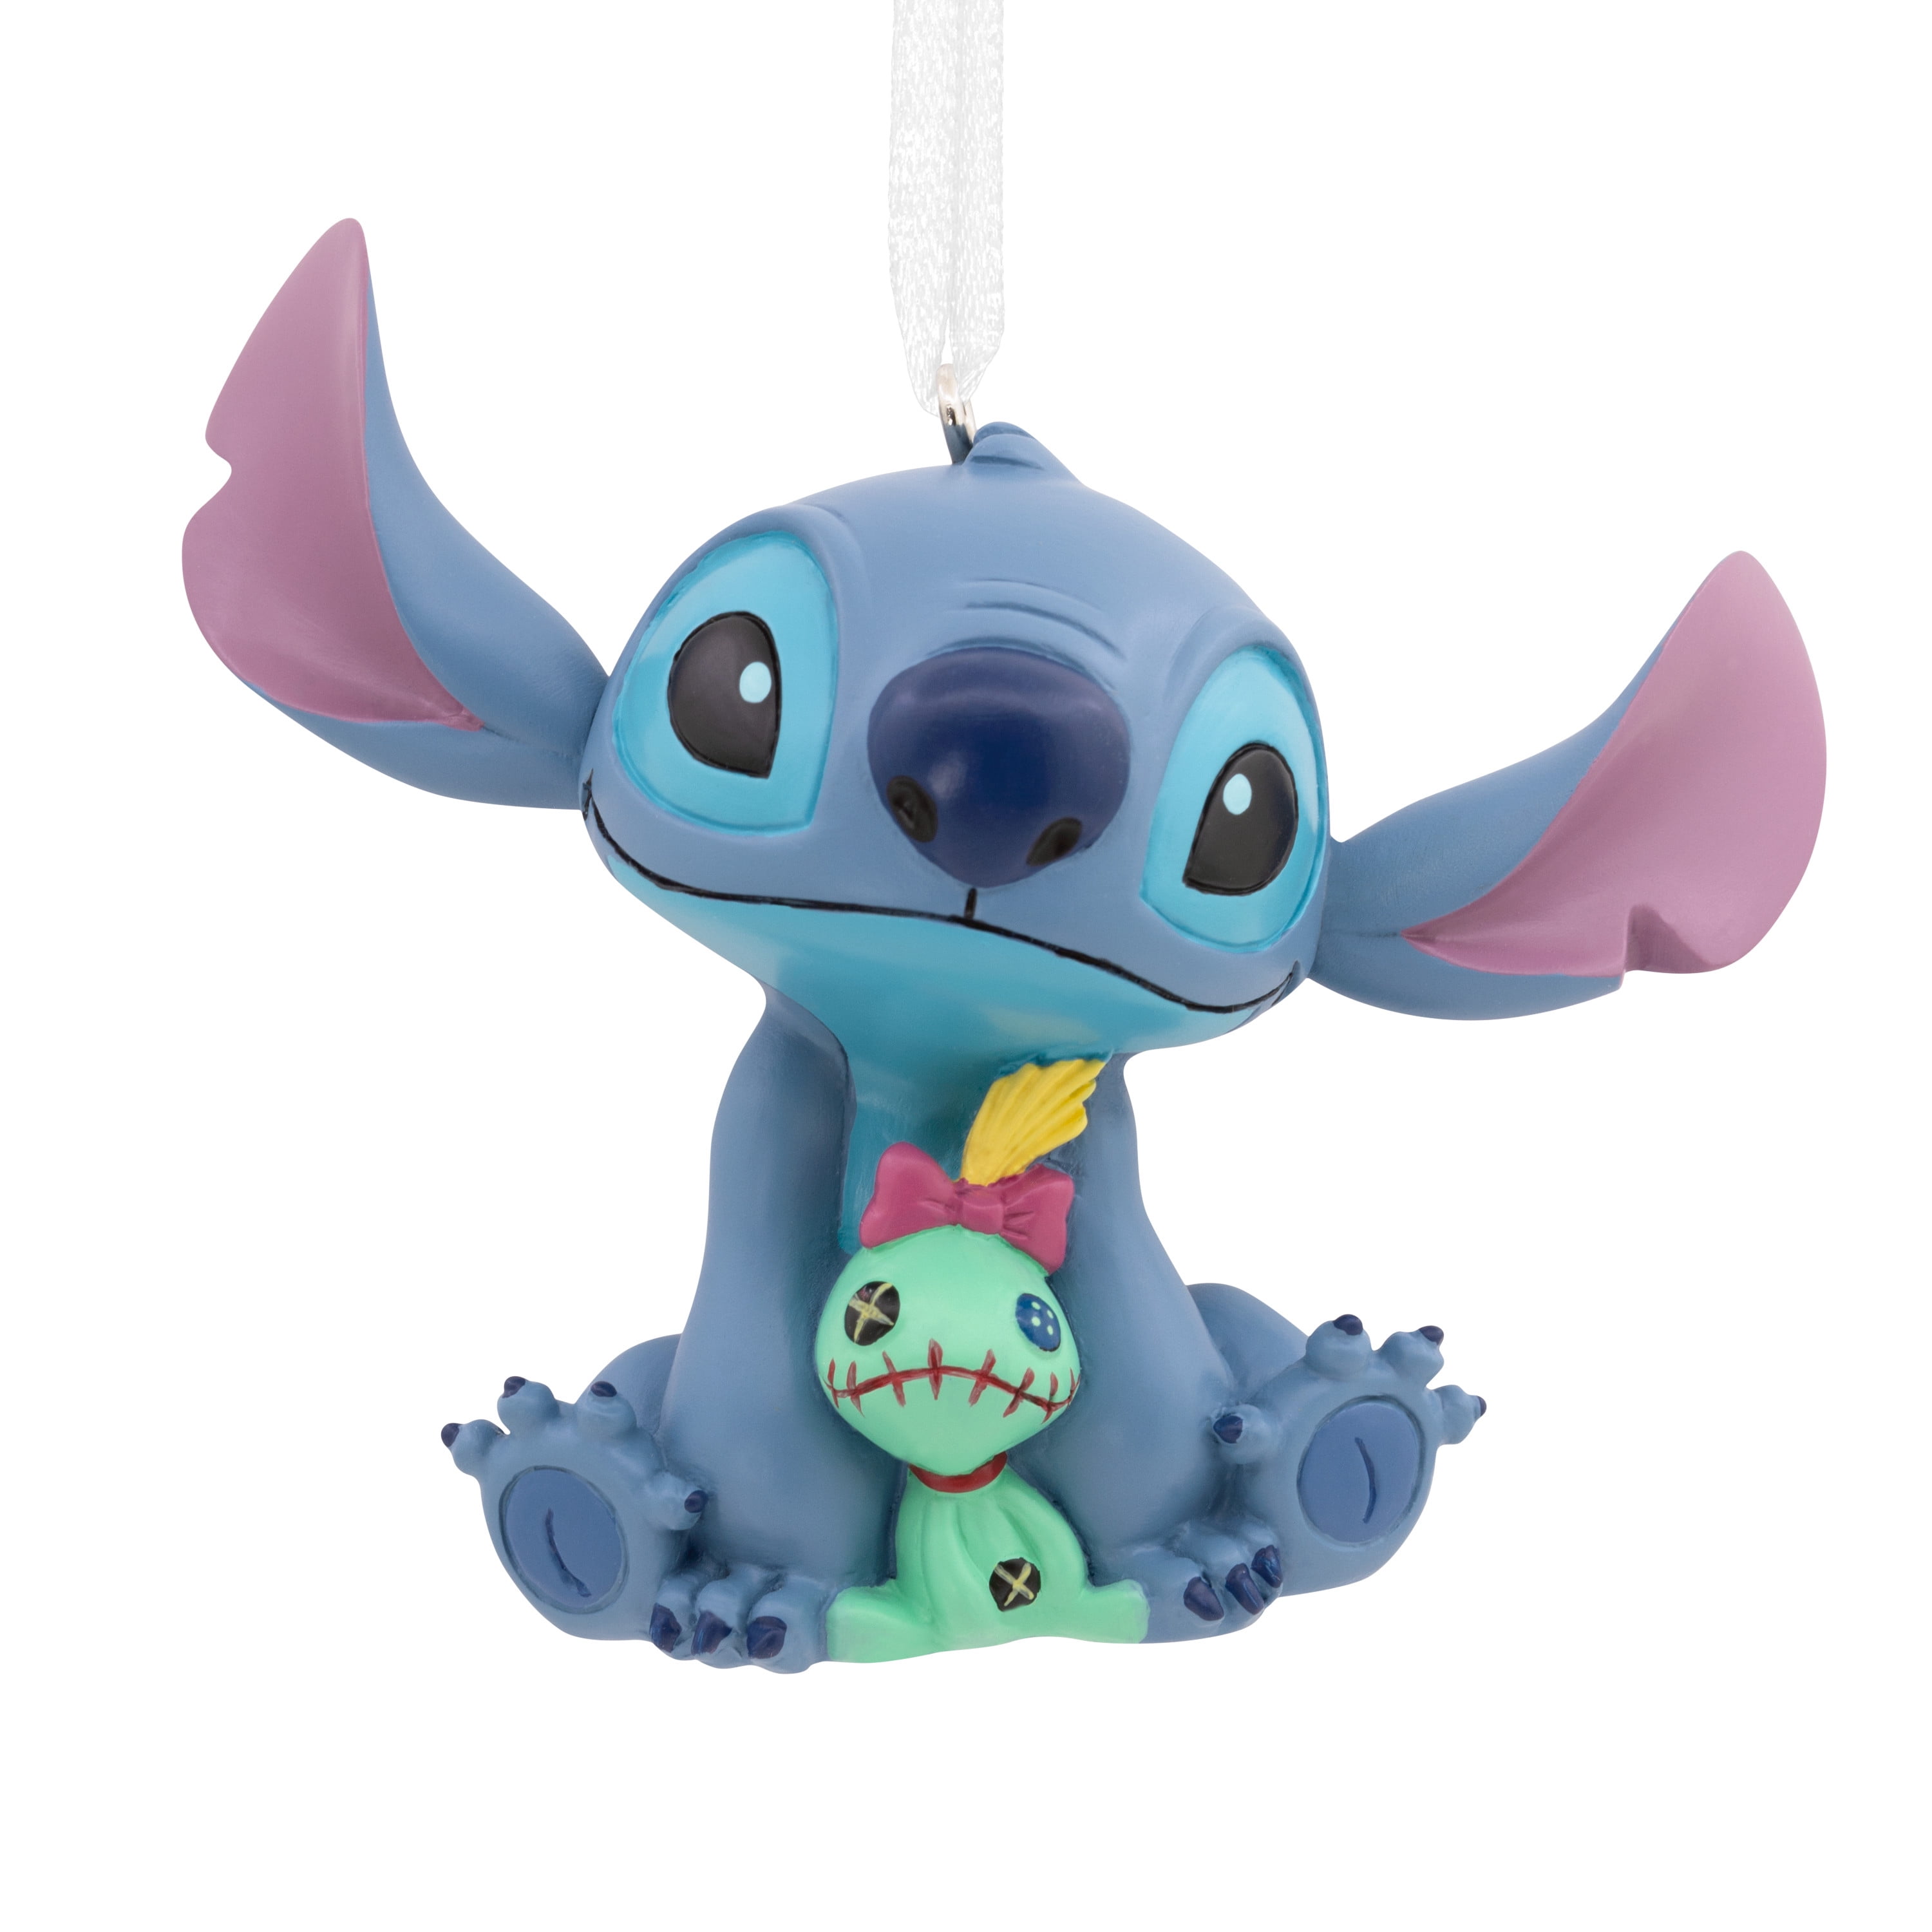 Disney Lilo and Stitch Stitch Smiling Edible Cake Topper Image ABPID11060